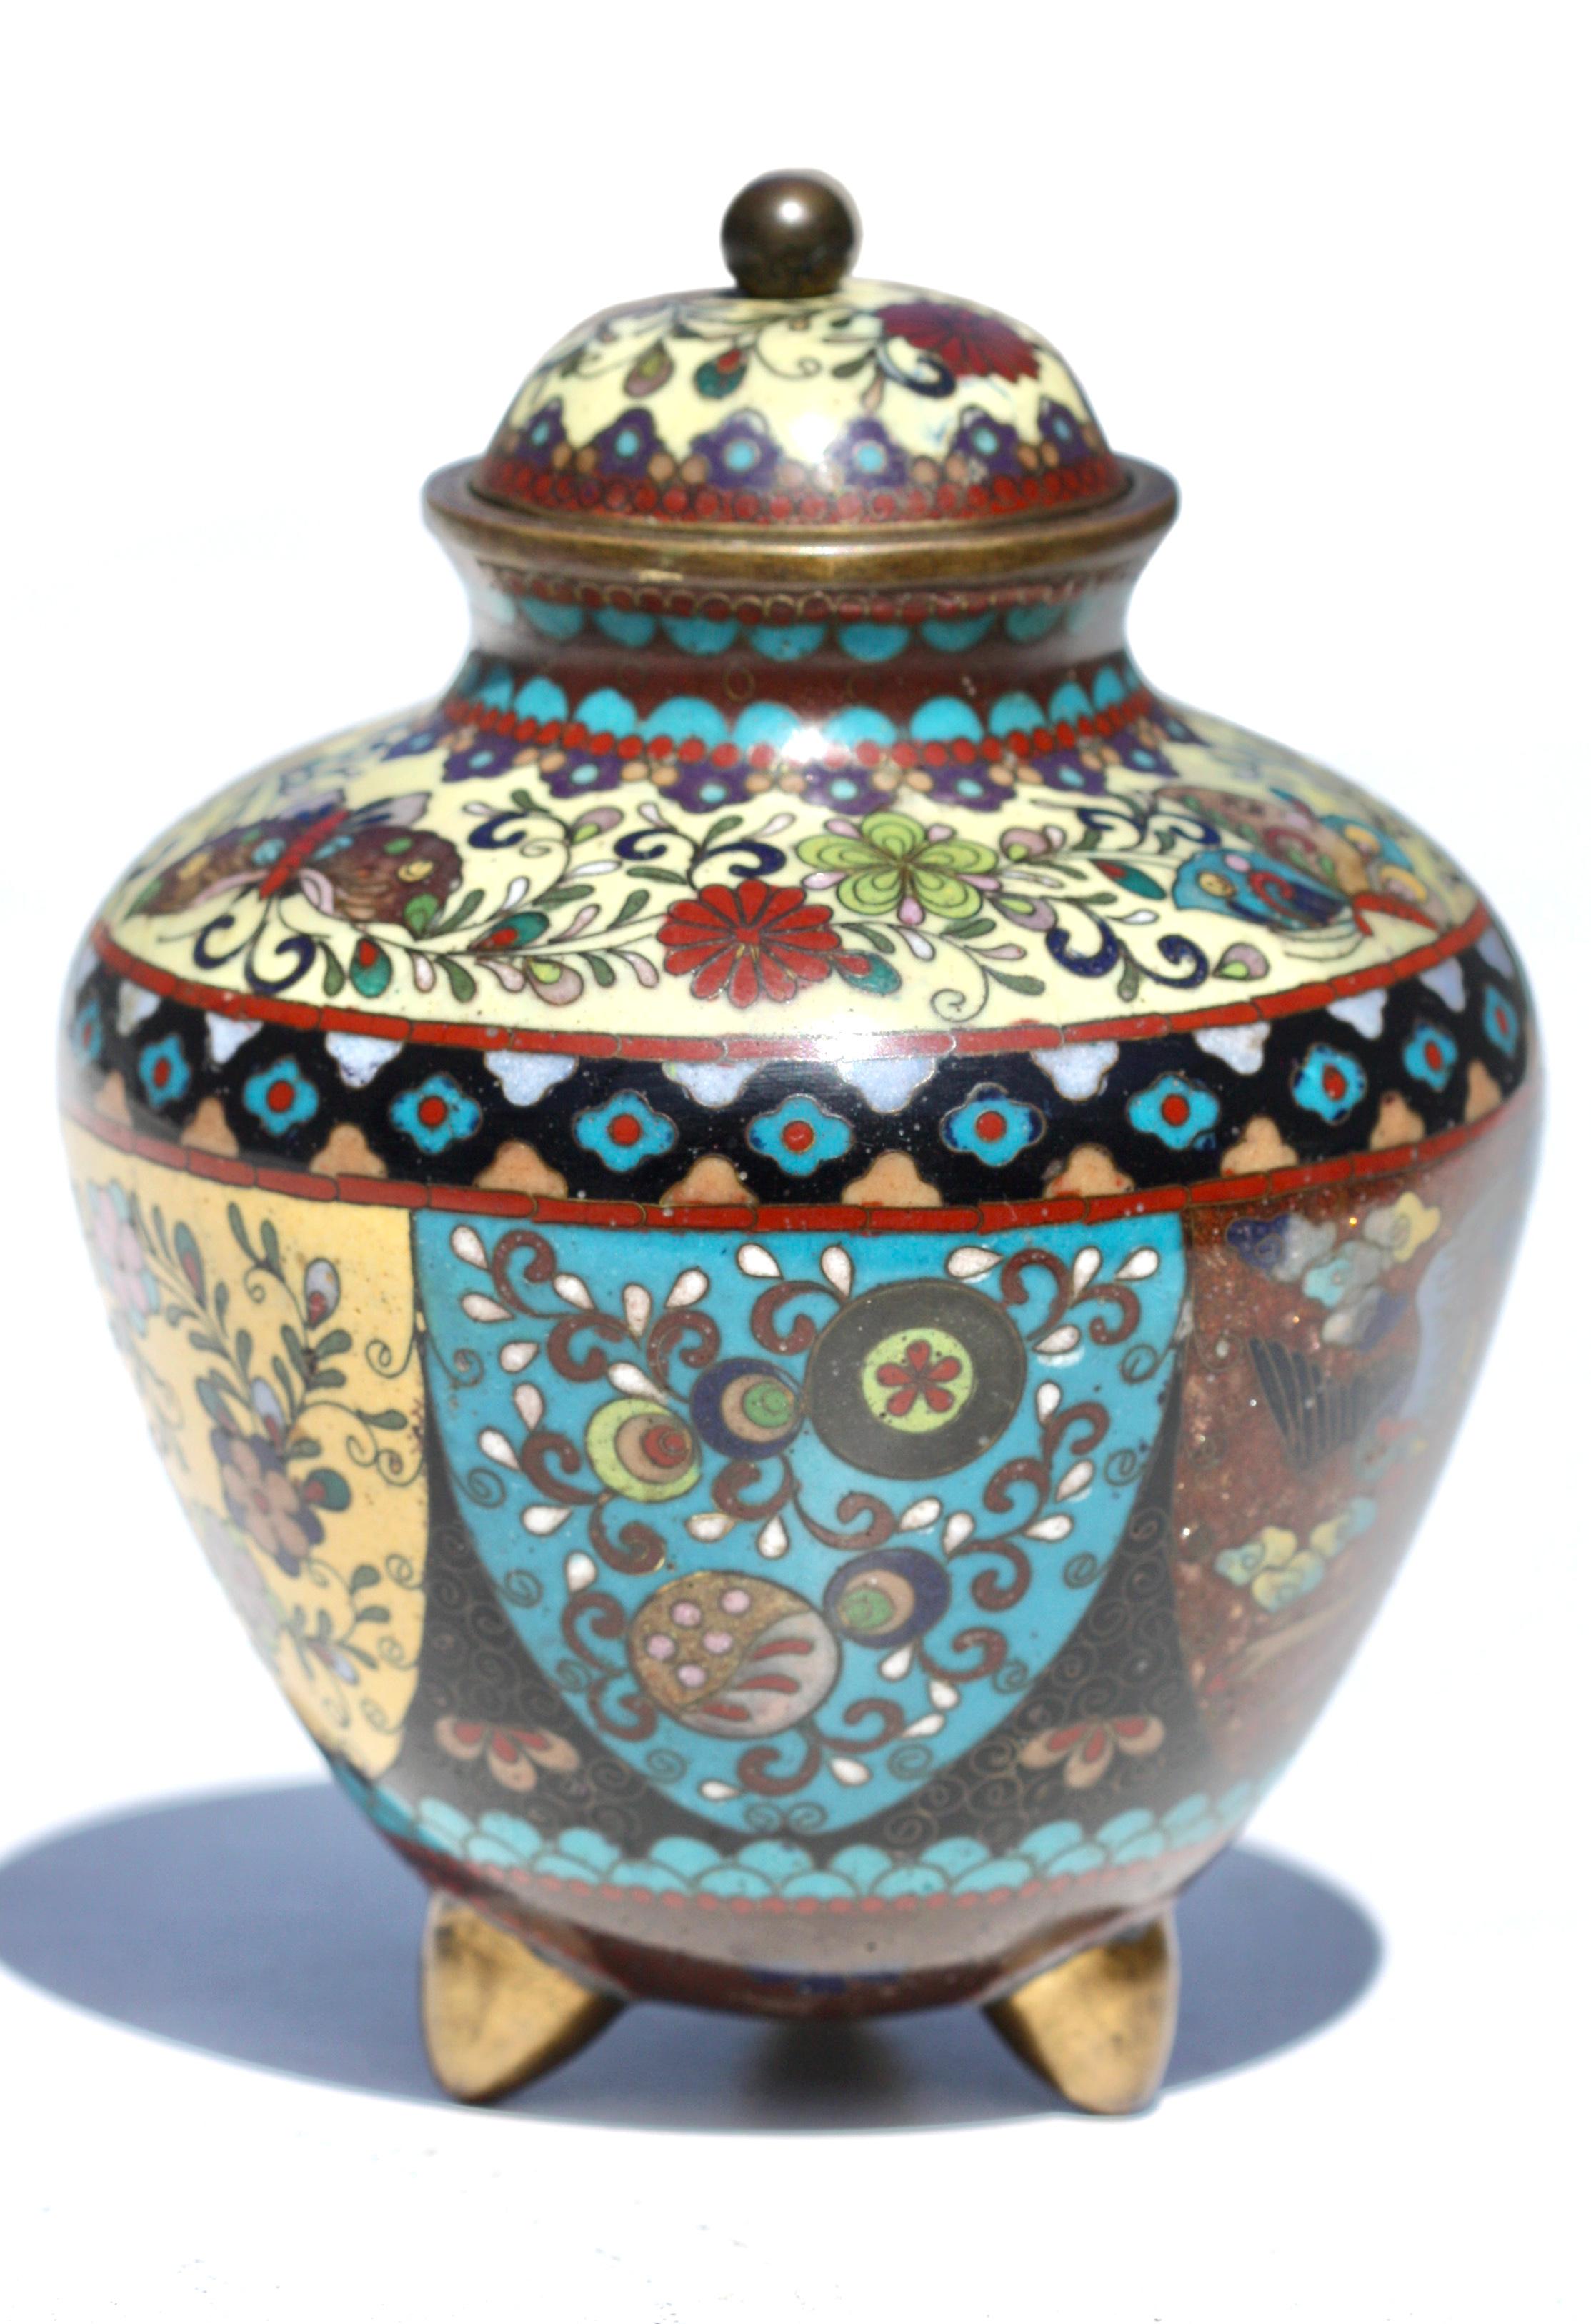 A Japanese Cloisonne vase and cover, Meiji period
finely decorated in silver and copper wire and a variety of coloured enamels with six panels, the body and cover with bands of lappets and geometric patterns supported by tripod feet,
Measures: